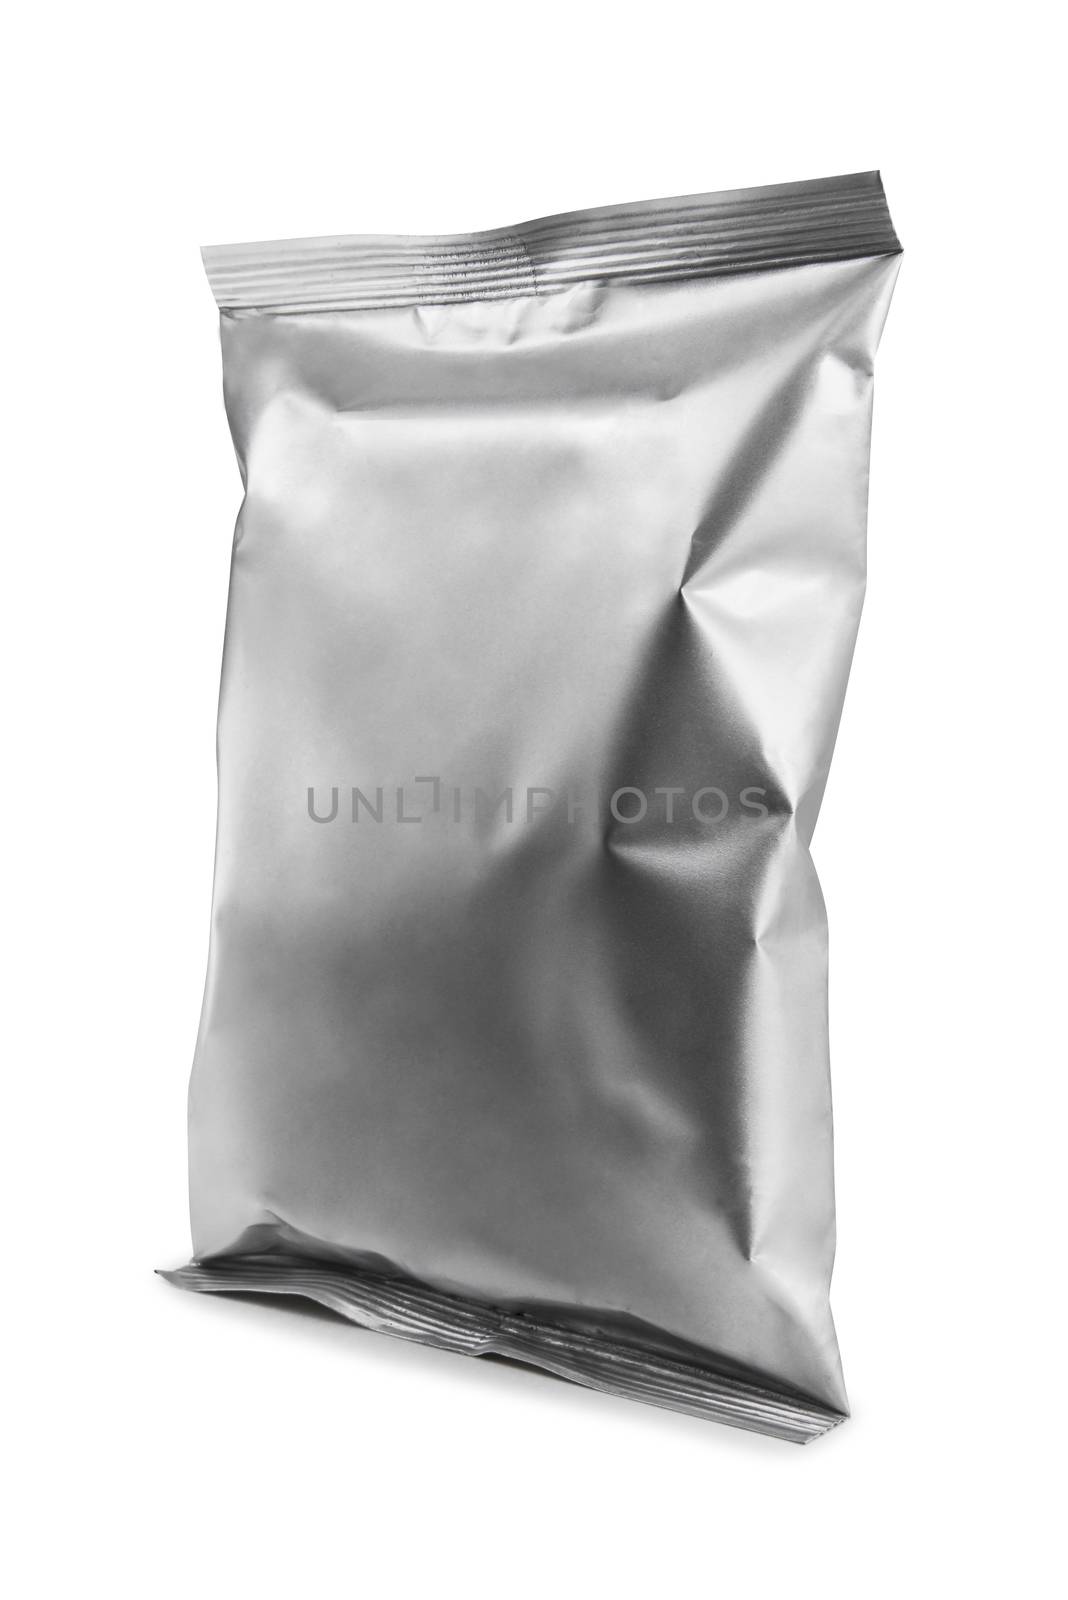 Packing aluminiumon white background. Clean for your design